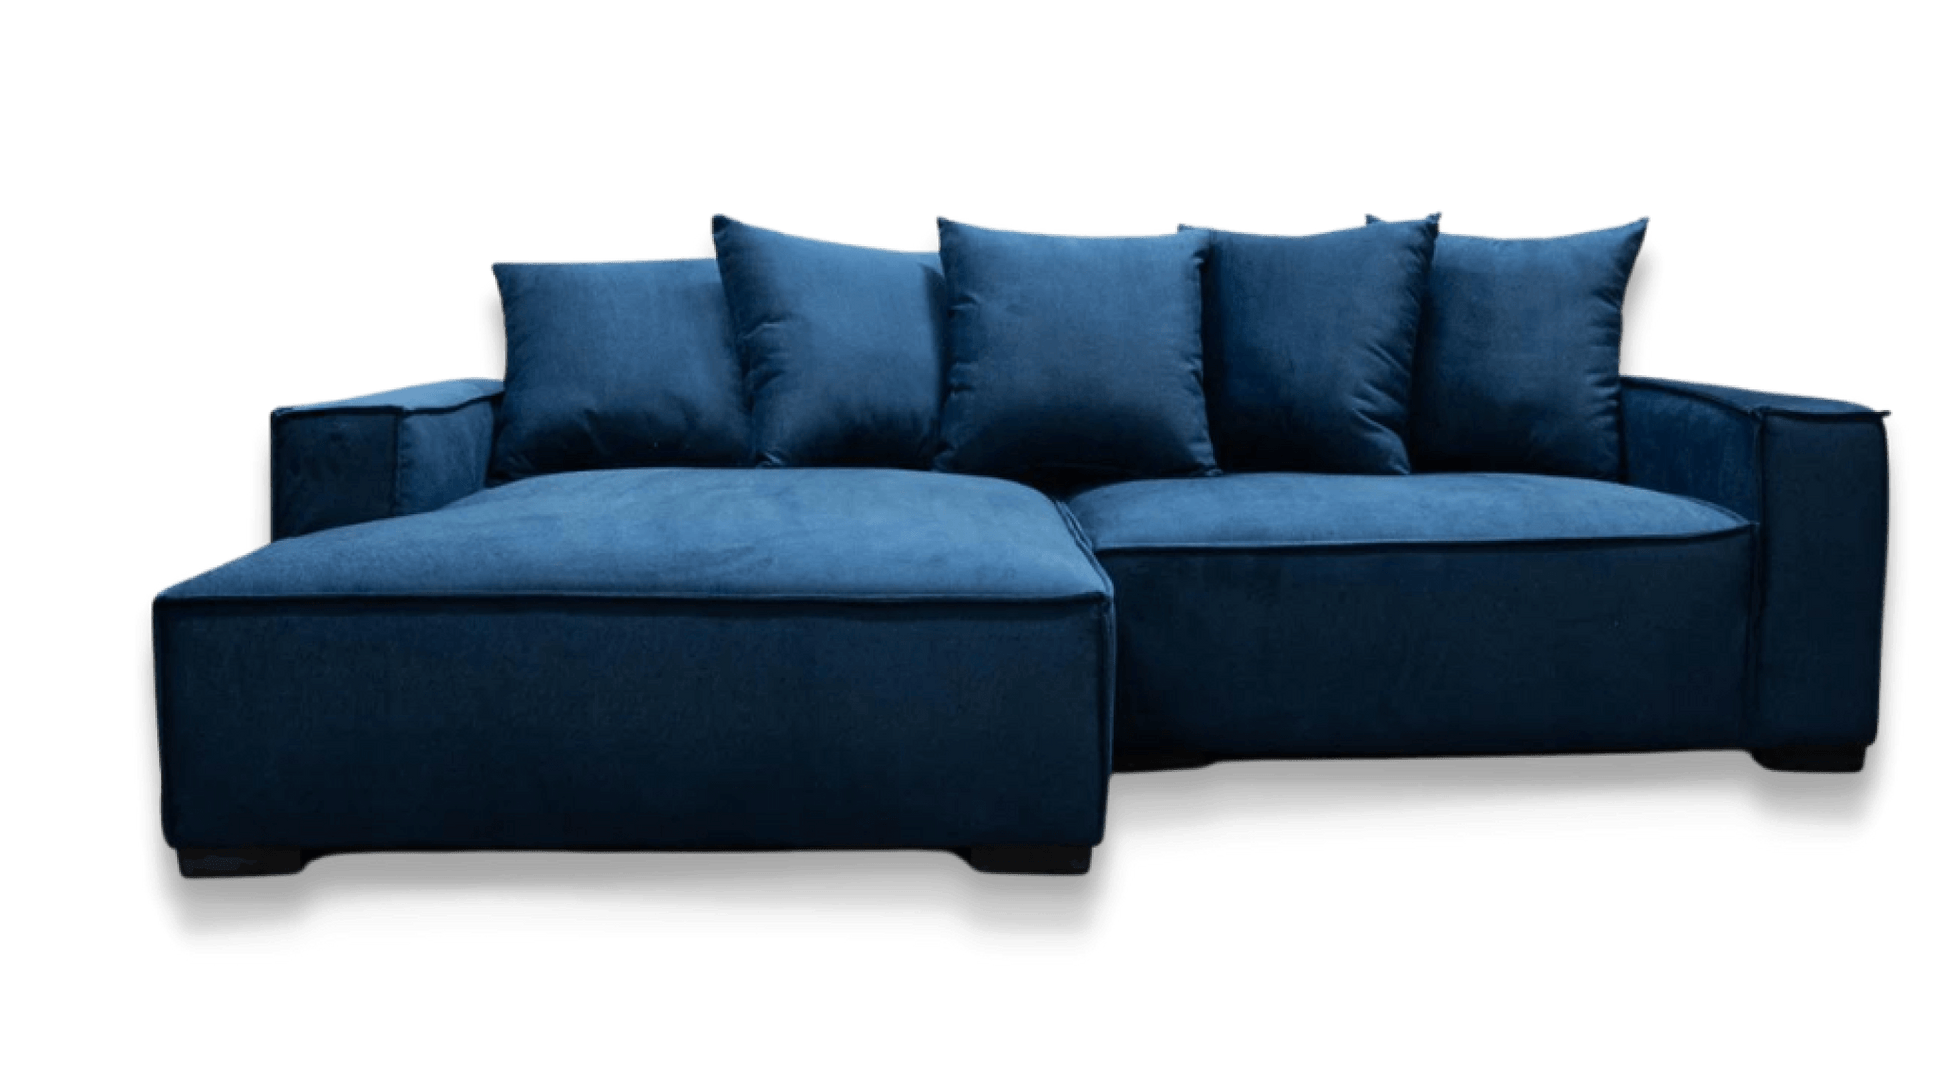 Madison 2 - Piece Upholstered Sectional - We Live Cozy